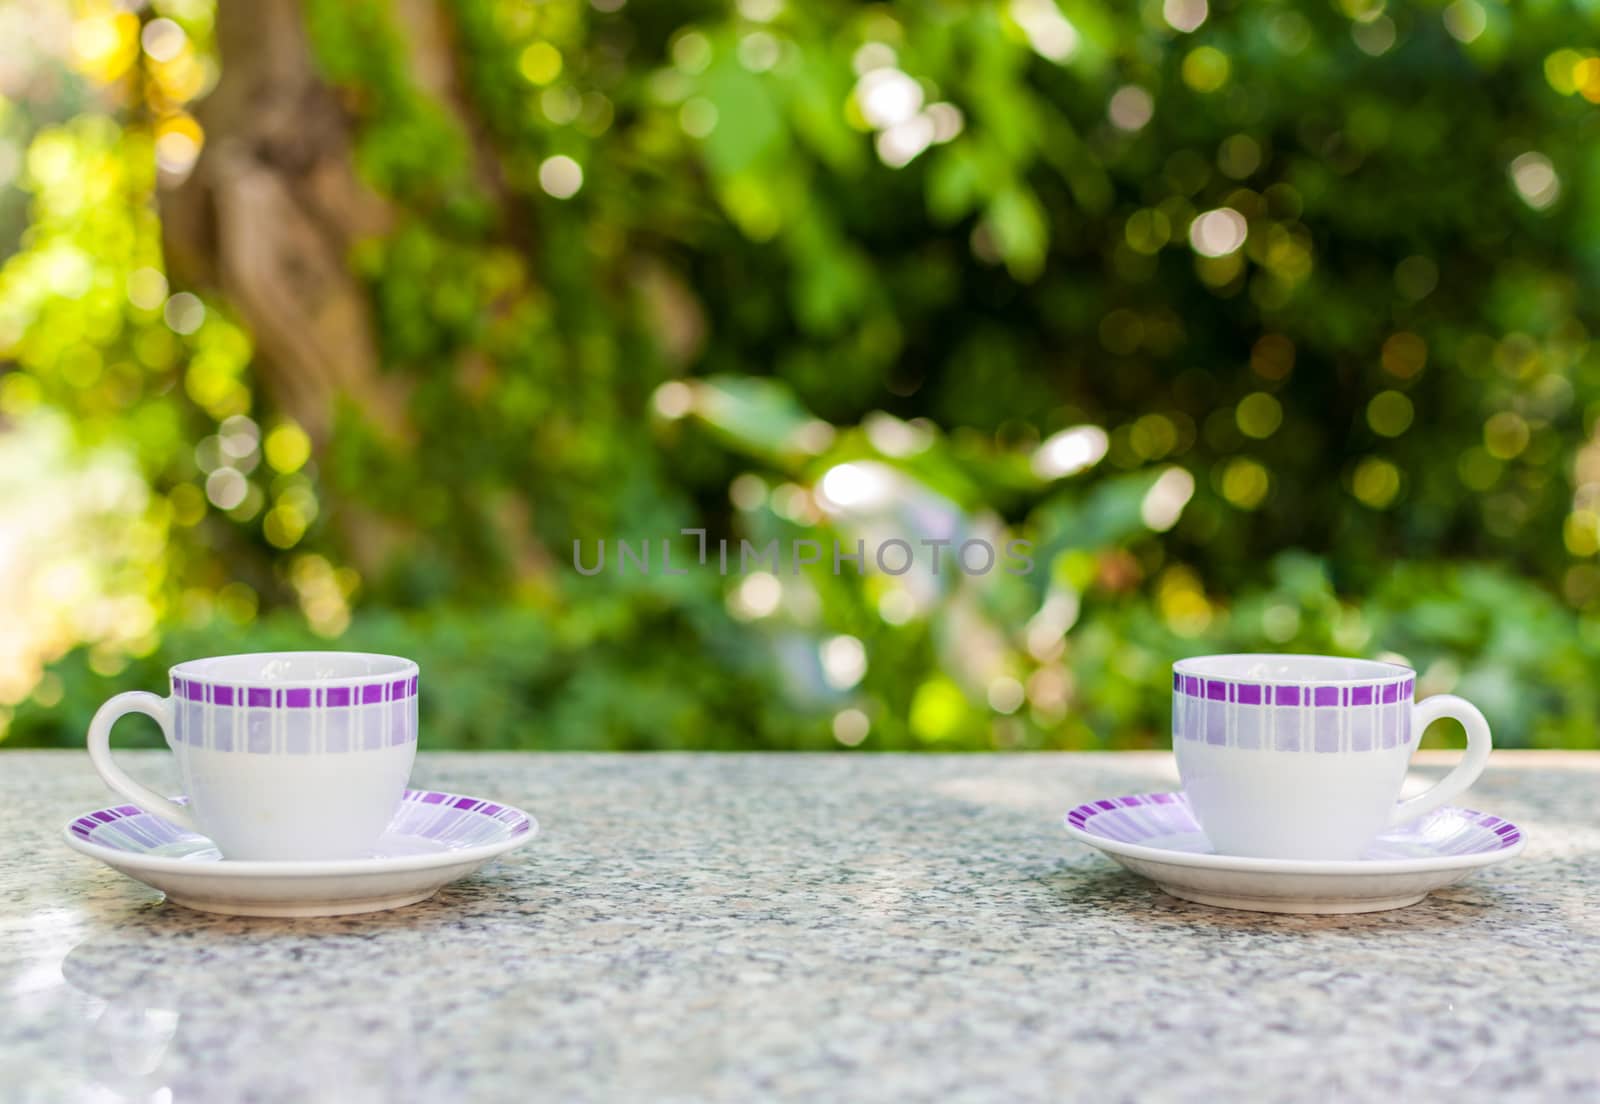 Breakfast in the garden with two little cups of coffee